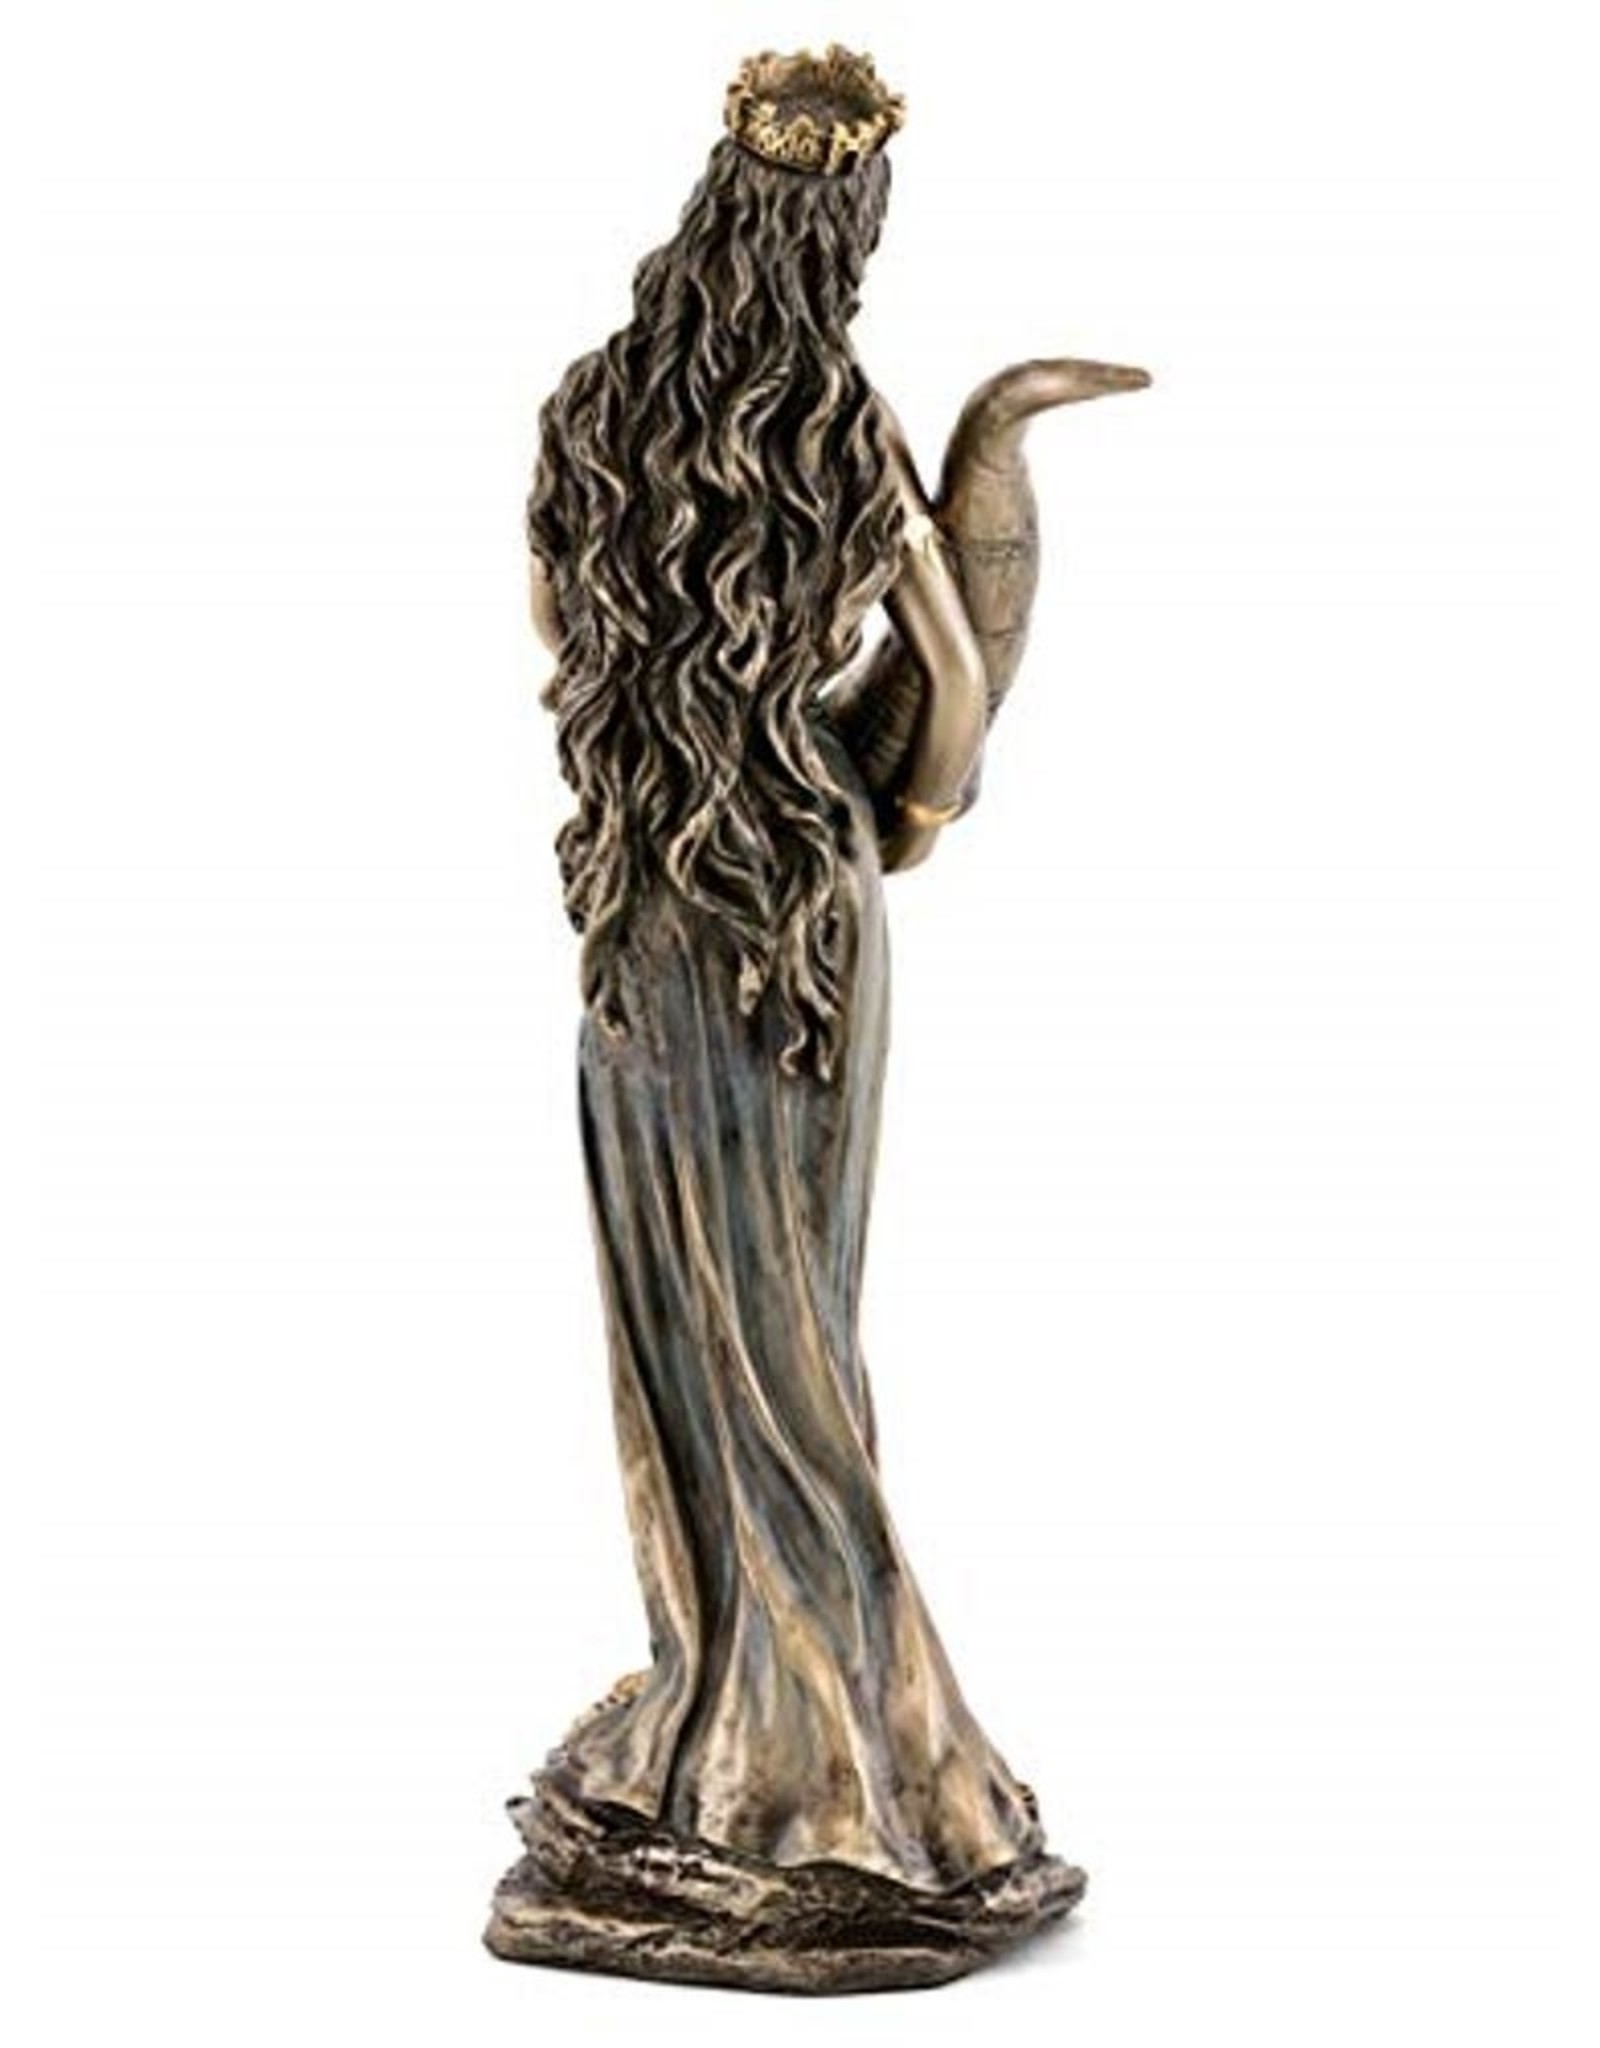 Veronese Design Giftware Figurines Collectables - Fortuna Roman Goddess of Fortune, Fate or Chance